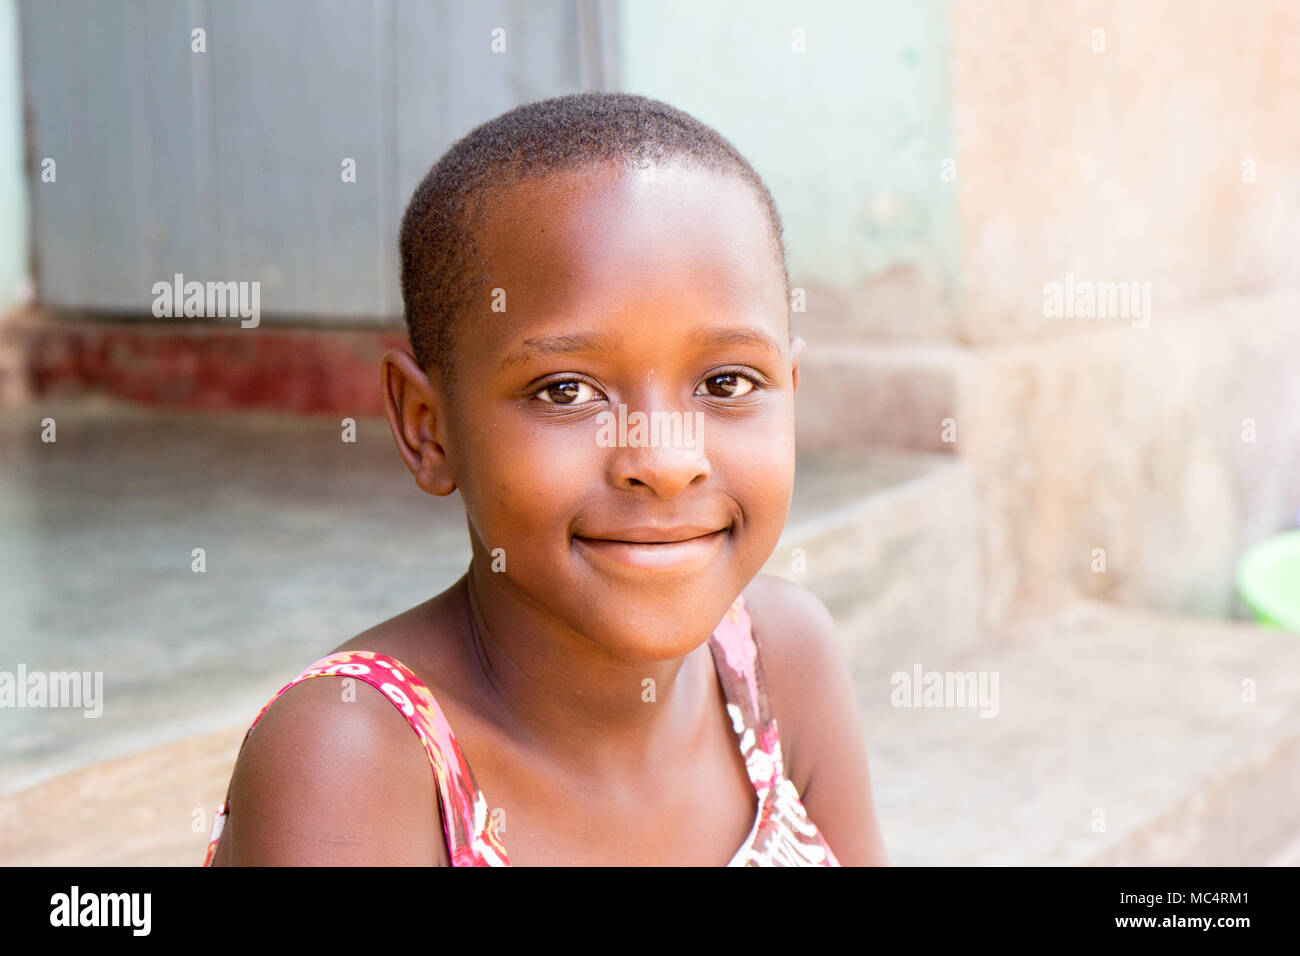 Lugazi, Uganda. 14 May 2017. A portrait of a beautiful Ugandan girl sitting on the stairs in front of a house. Stock Photo